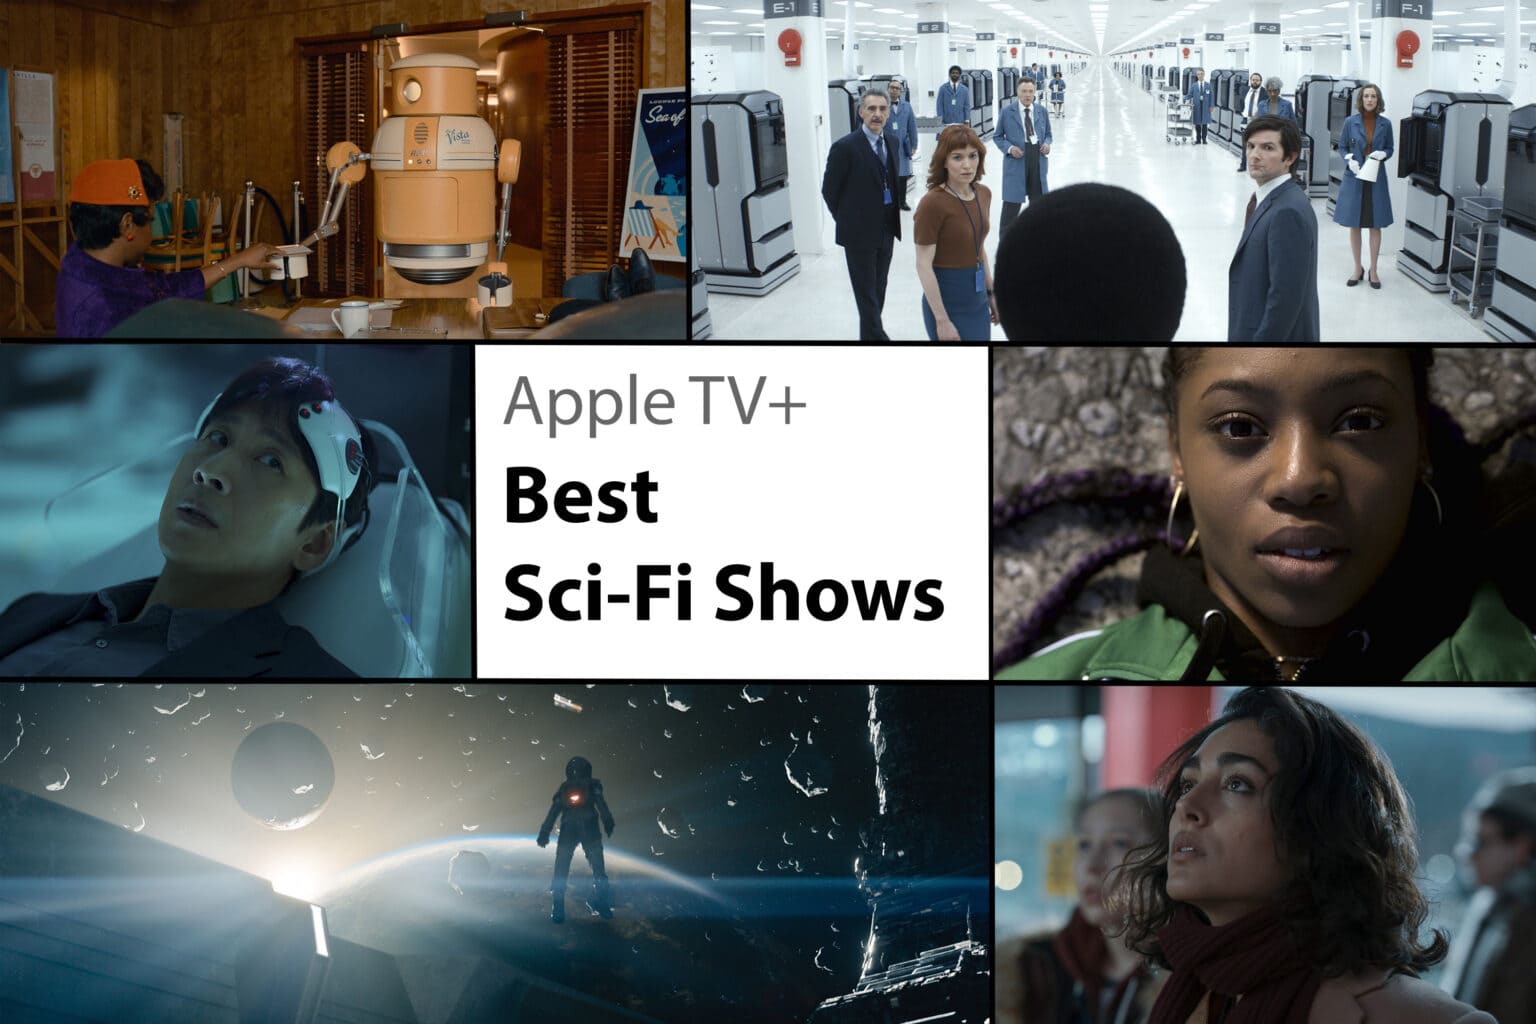 A collage showing scenes from the best sci-fi shows on Apple TV+.